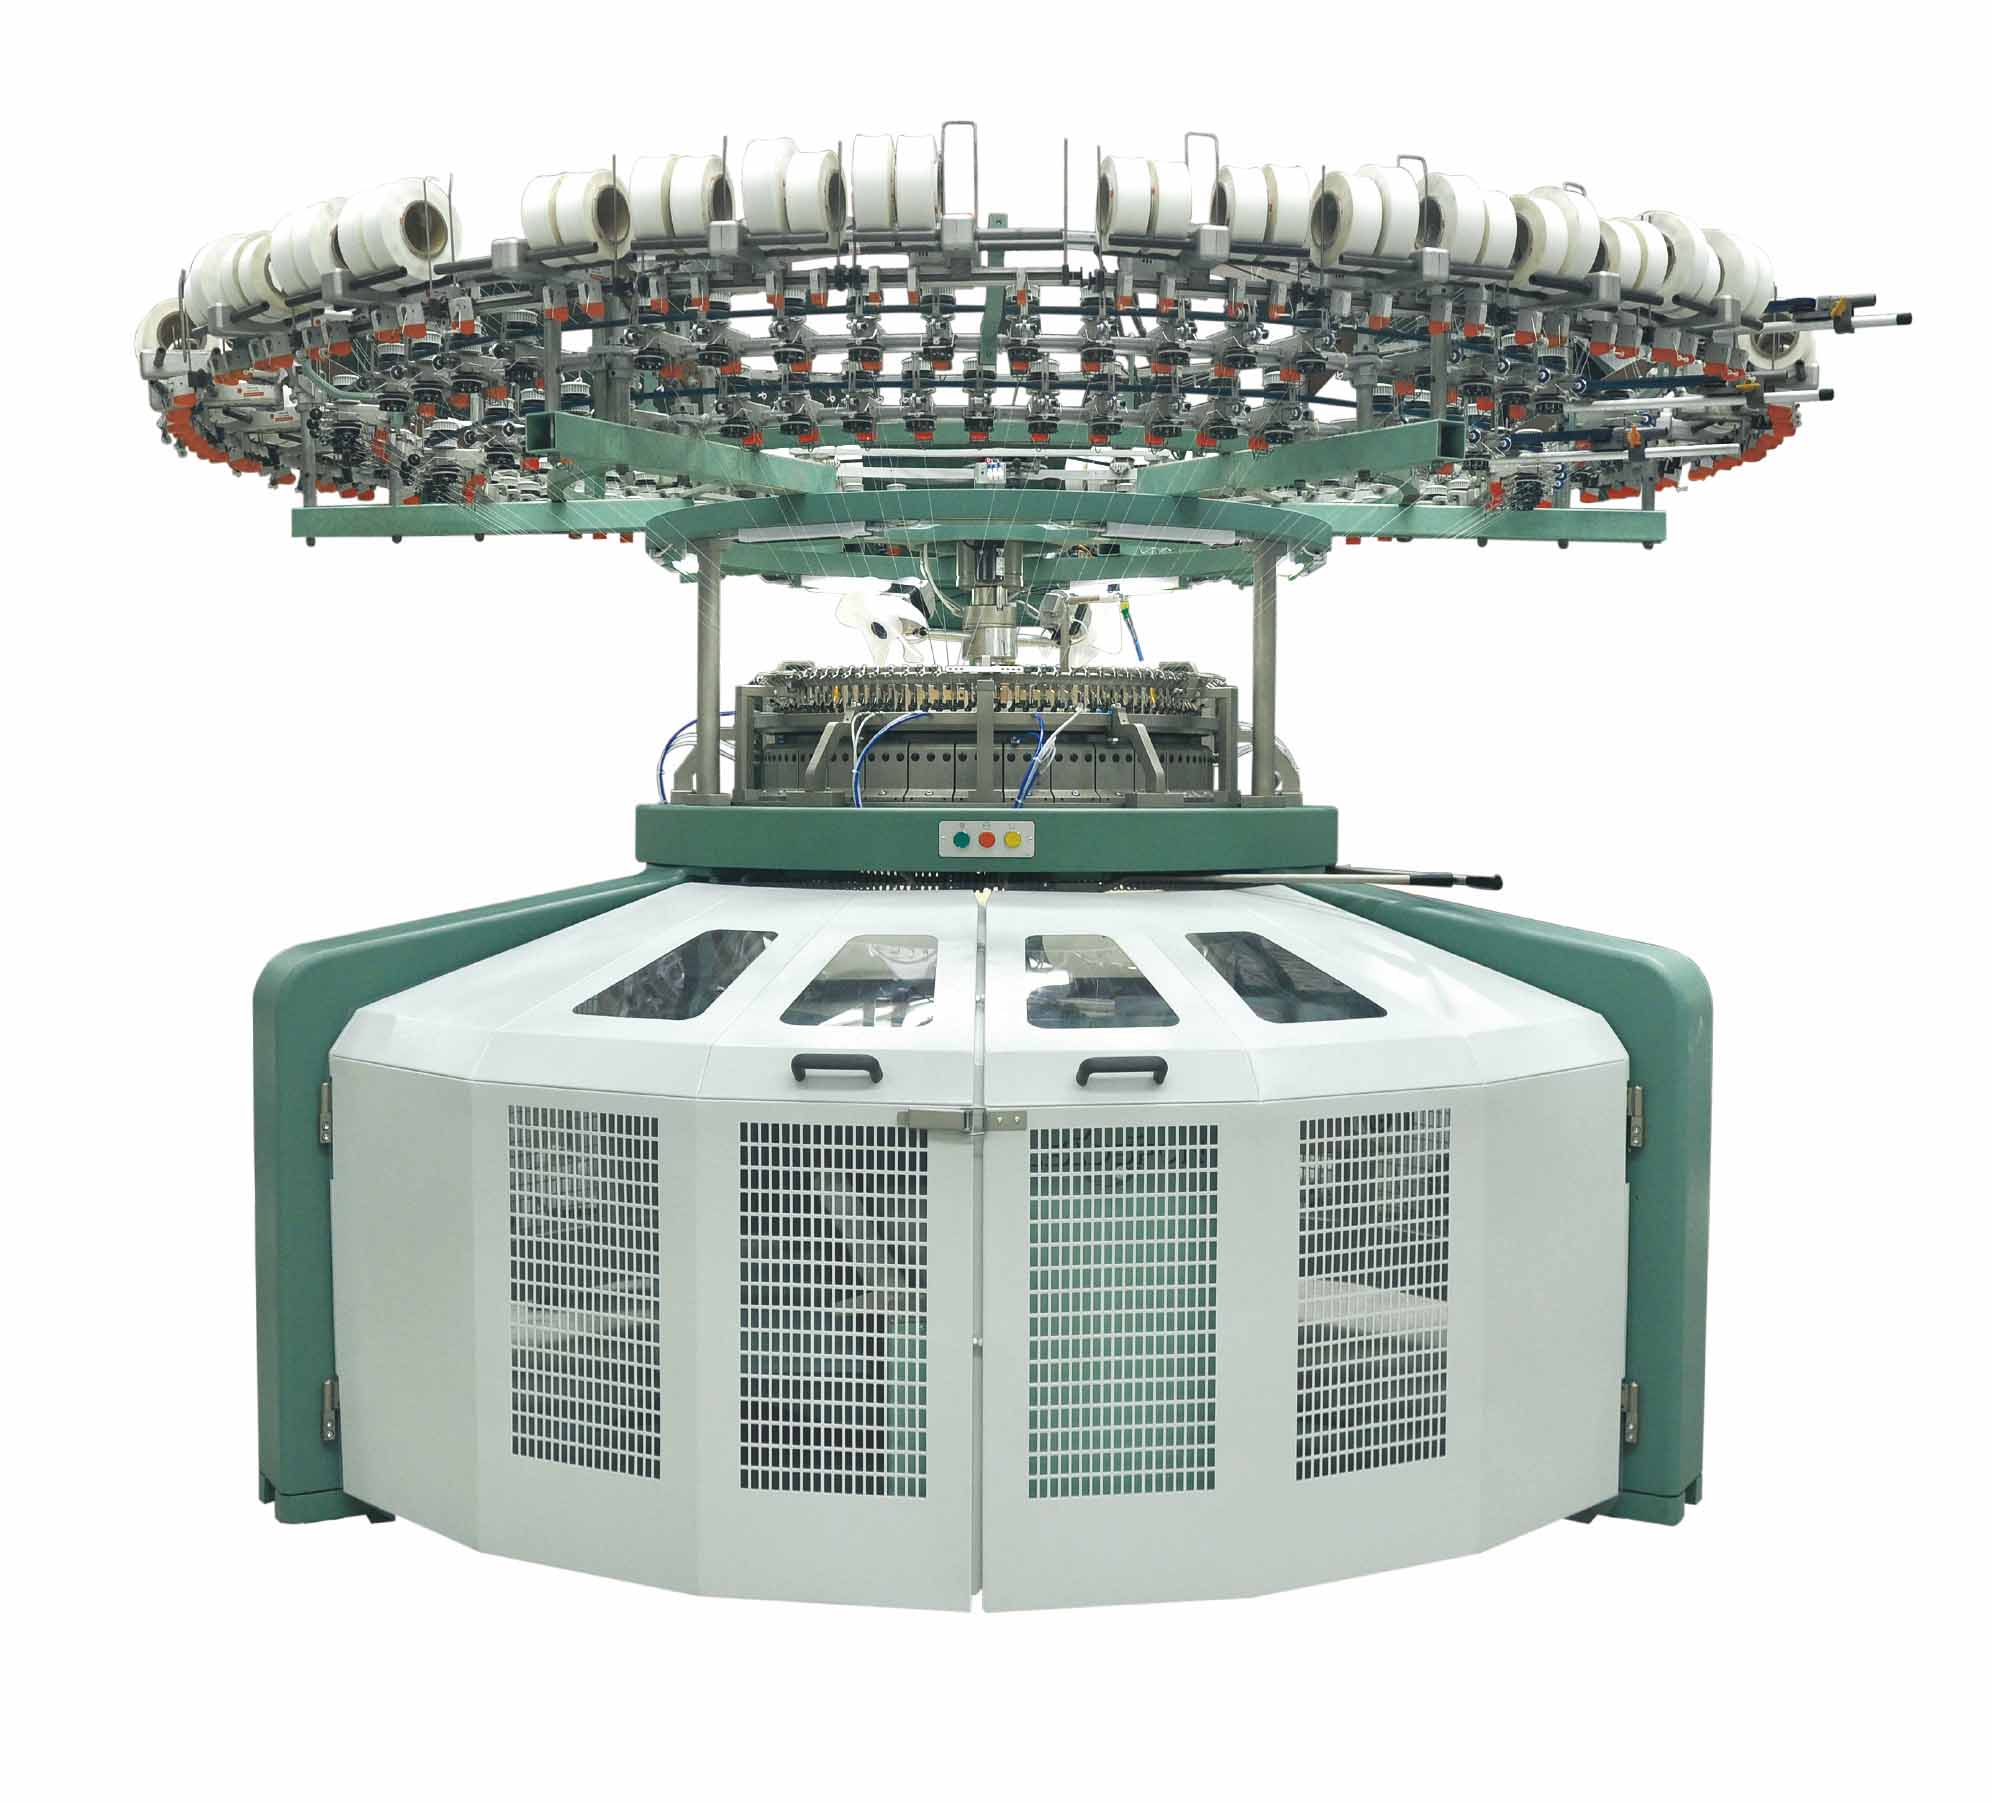 Revolutionary Sinkerless Circular Knitting Machine Unveiled in China – Discover More!